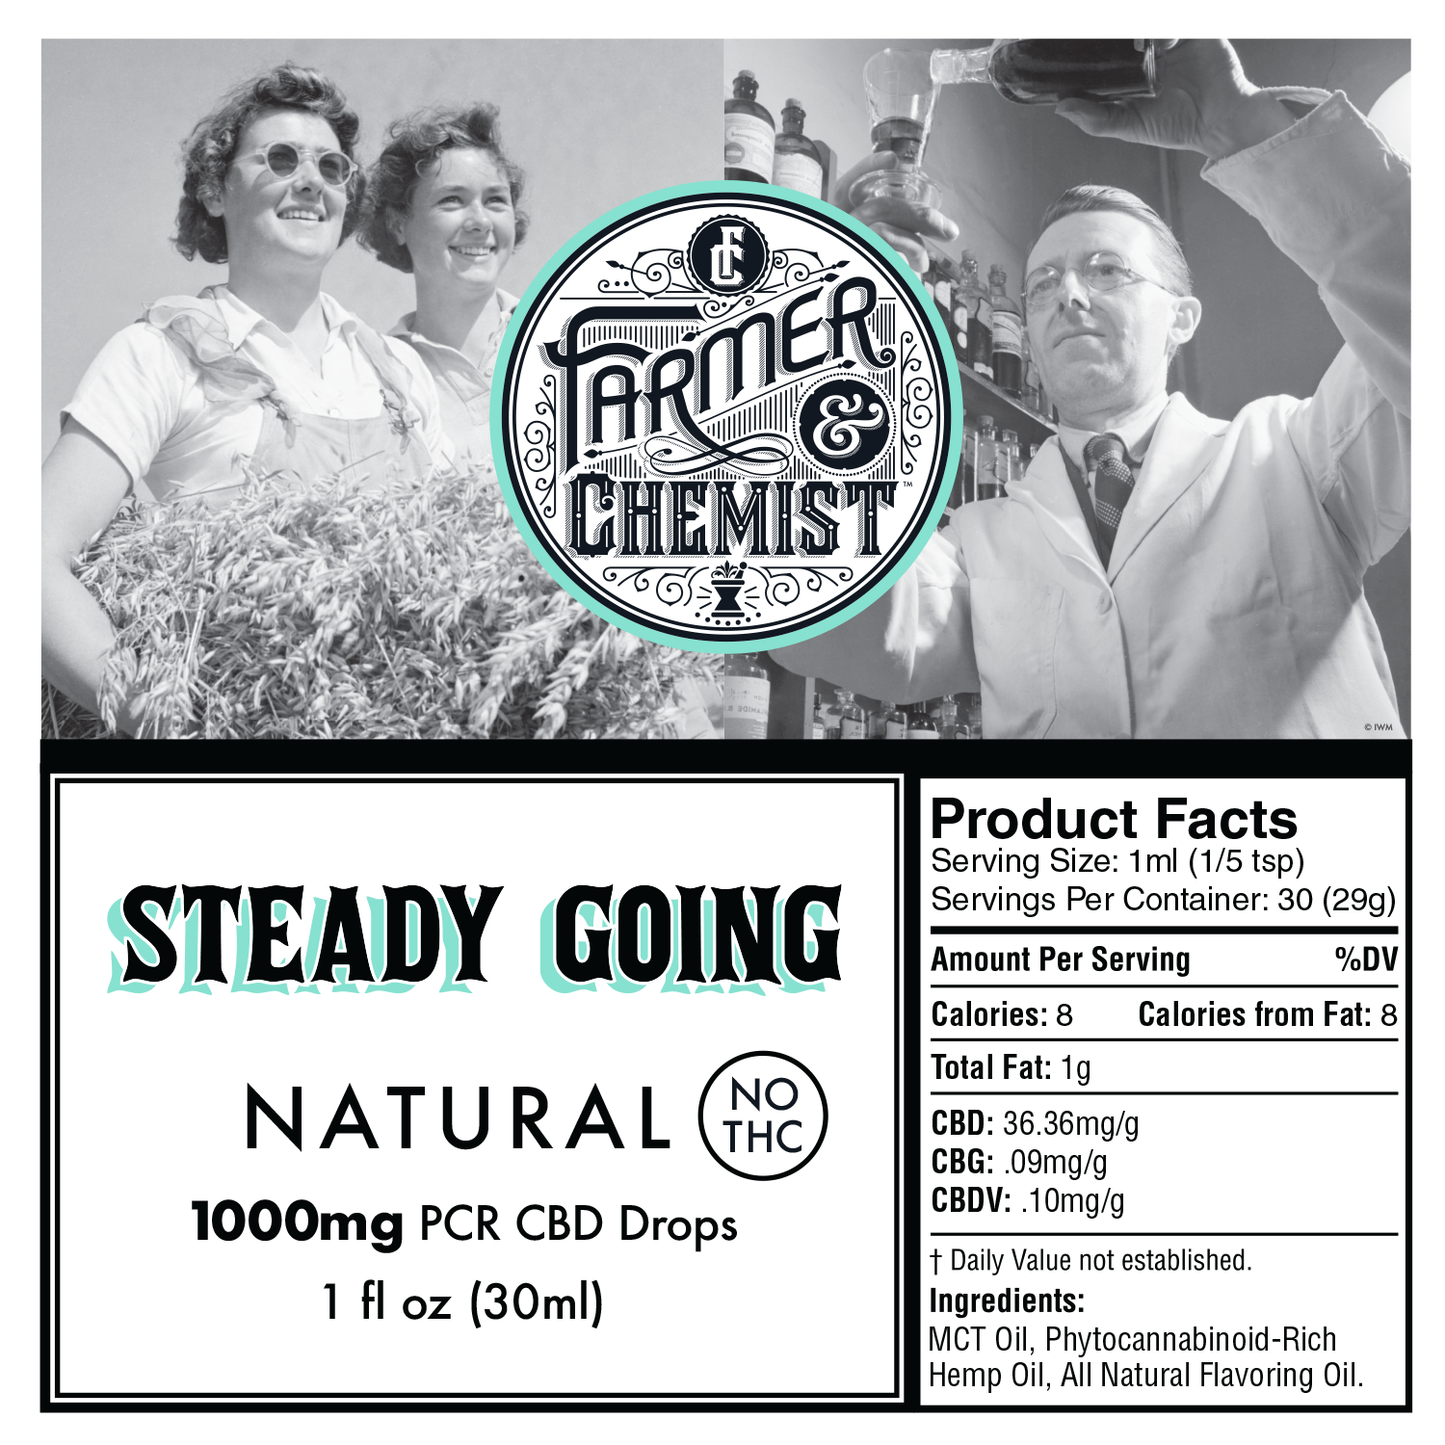 STEADY GOING - Natural 1000mg PCR Tincture